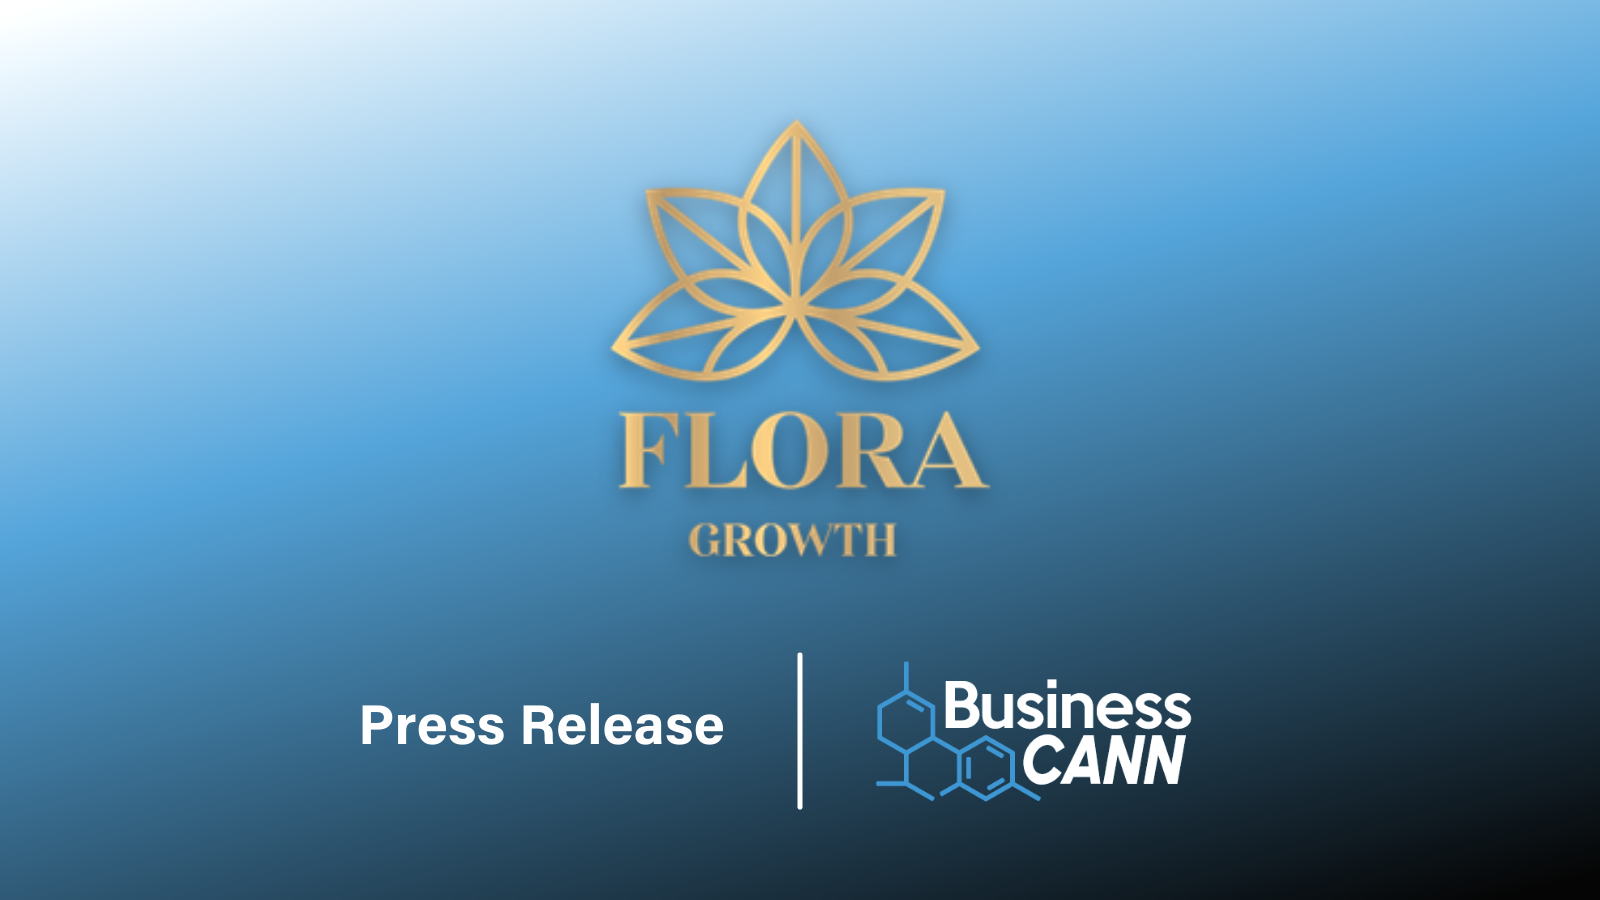 FLORA Growth Corp announced today that it has signed a definitive agreement to acquire 100% of Franchise Global Health Inc. (TSXV: FGH) (“FGH”), a multi-national operator in the medical cannabis and pharmaceutical industry, with principal operations in Germany.